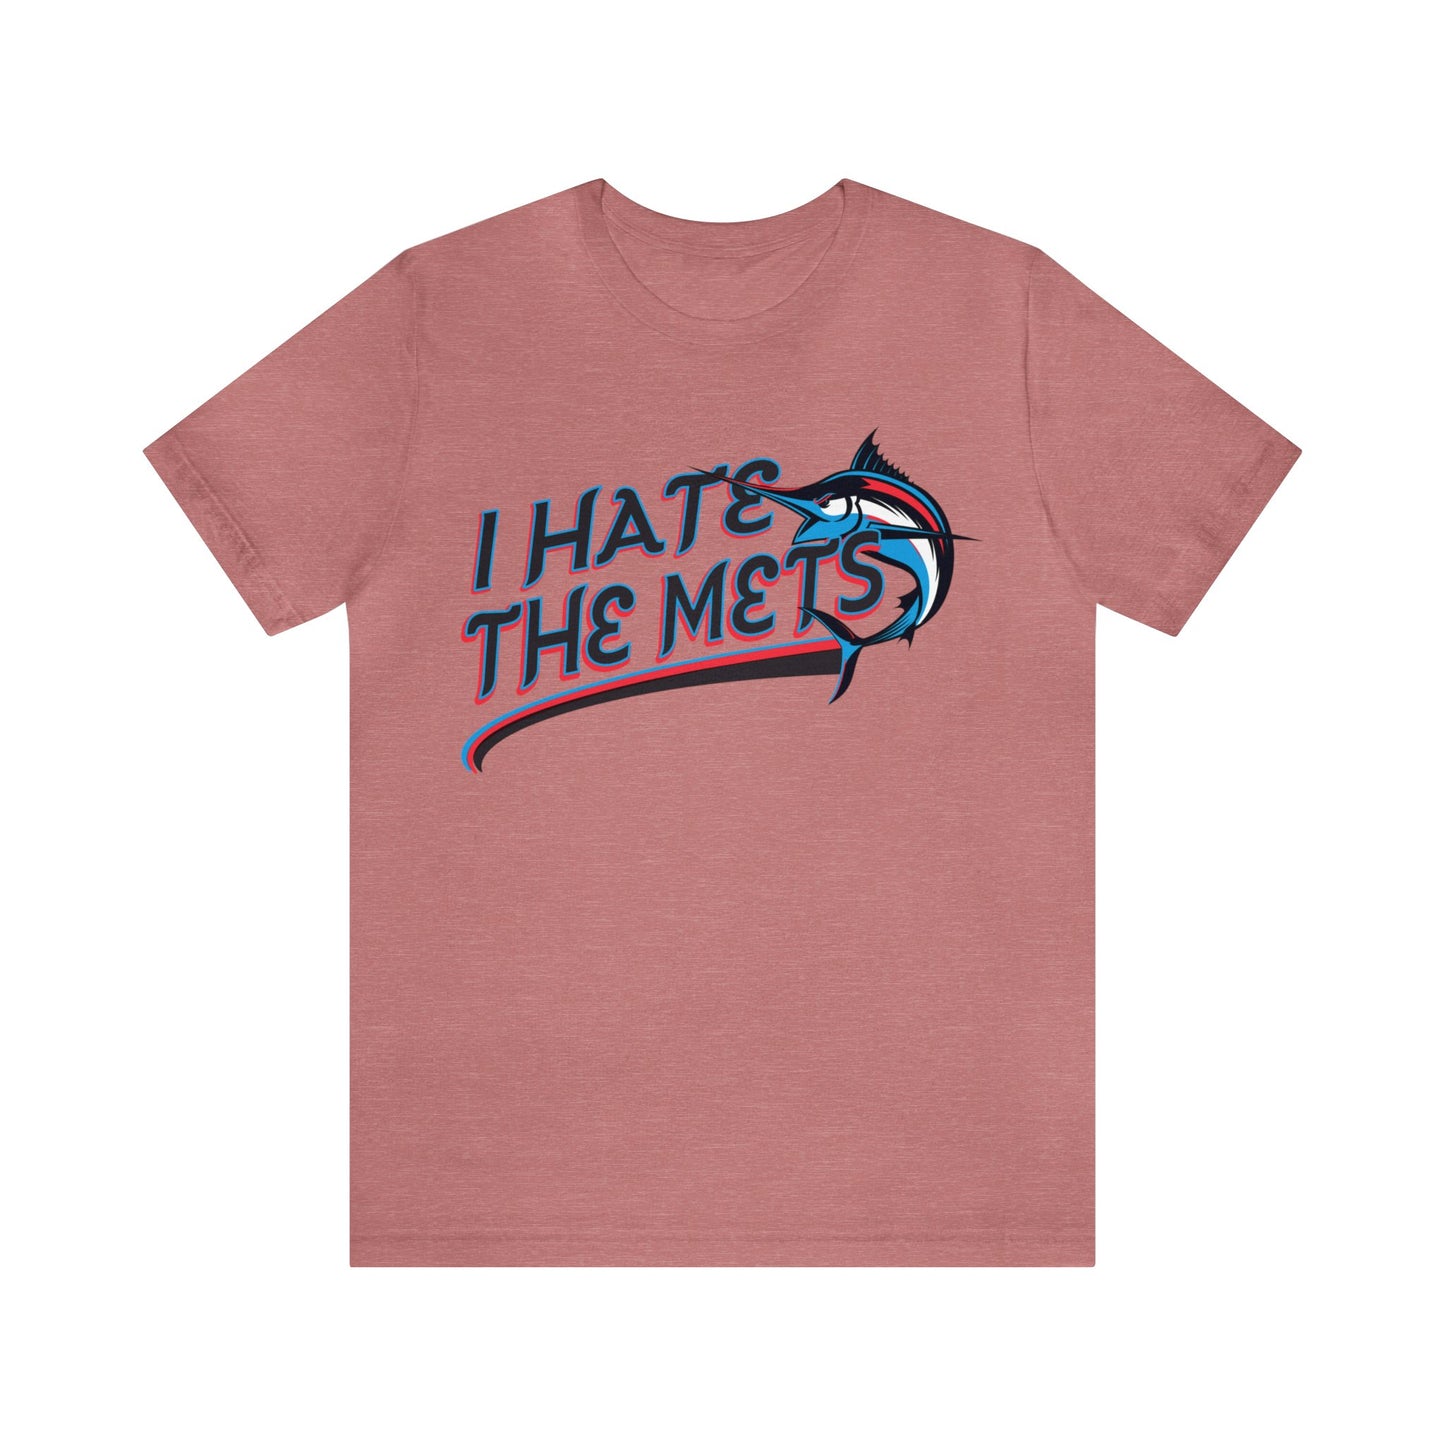 I Hate That NY Metros Team (for Miami Fans) - Unisex Jersey Short Sleeve Tee